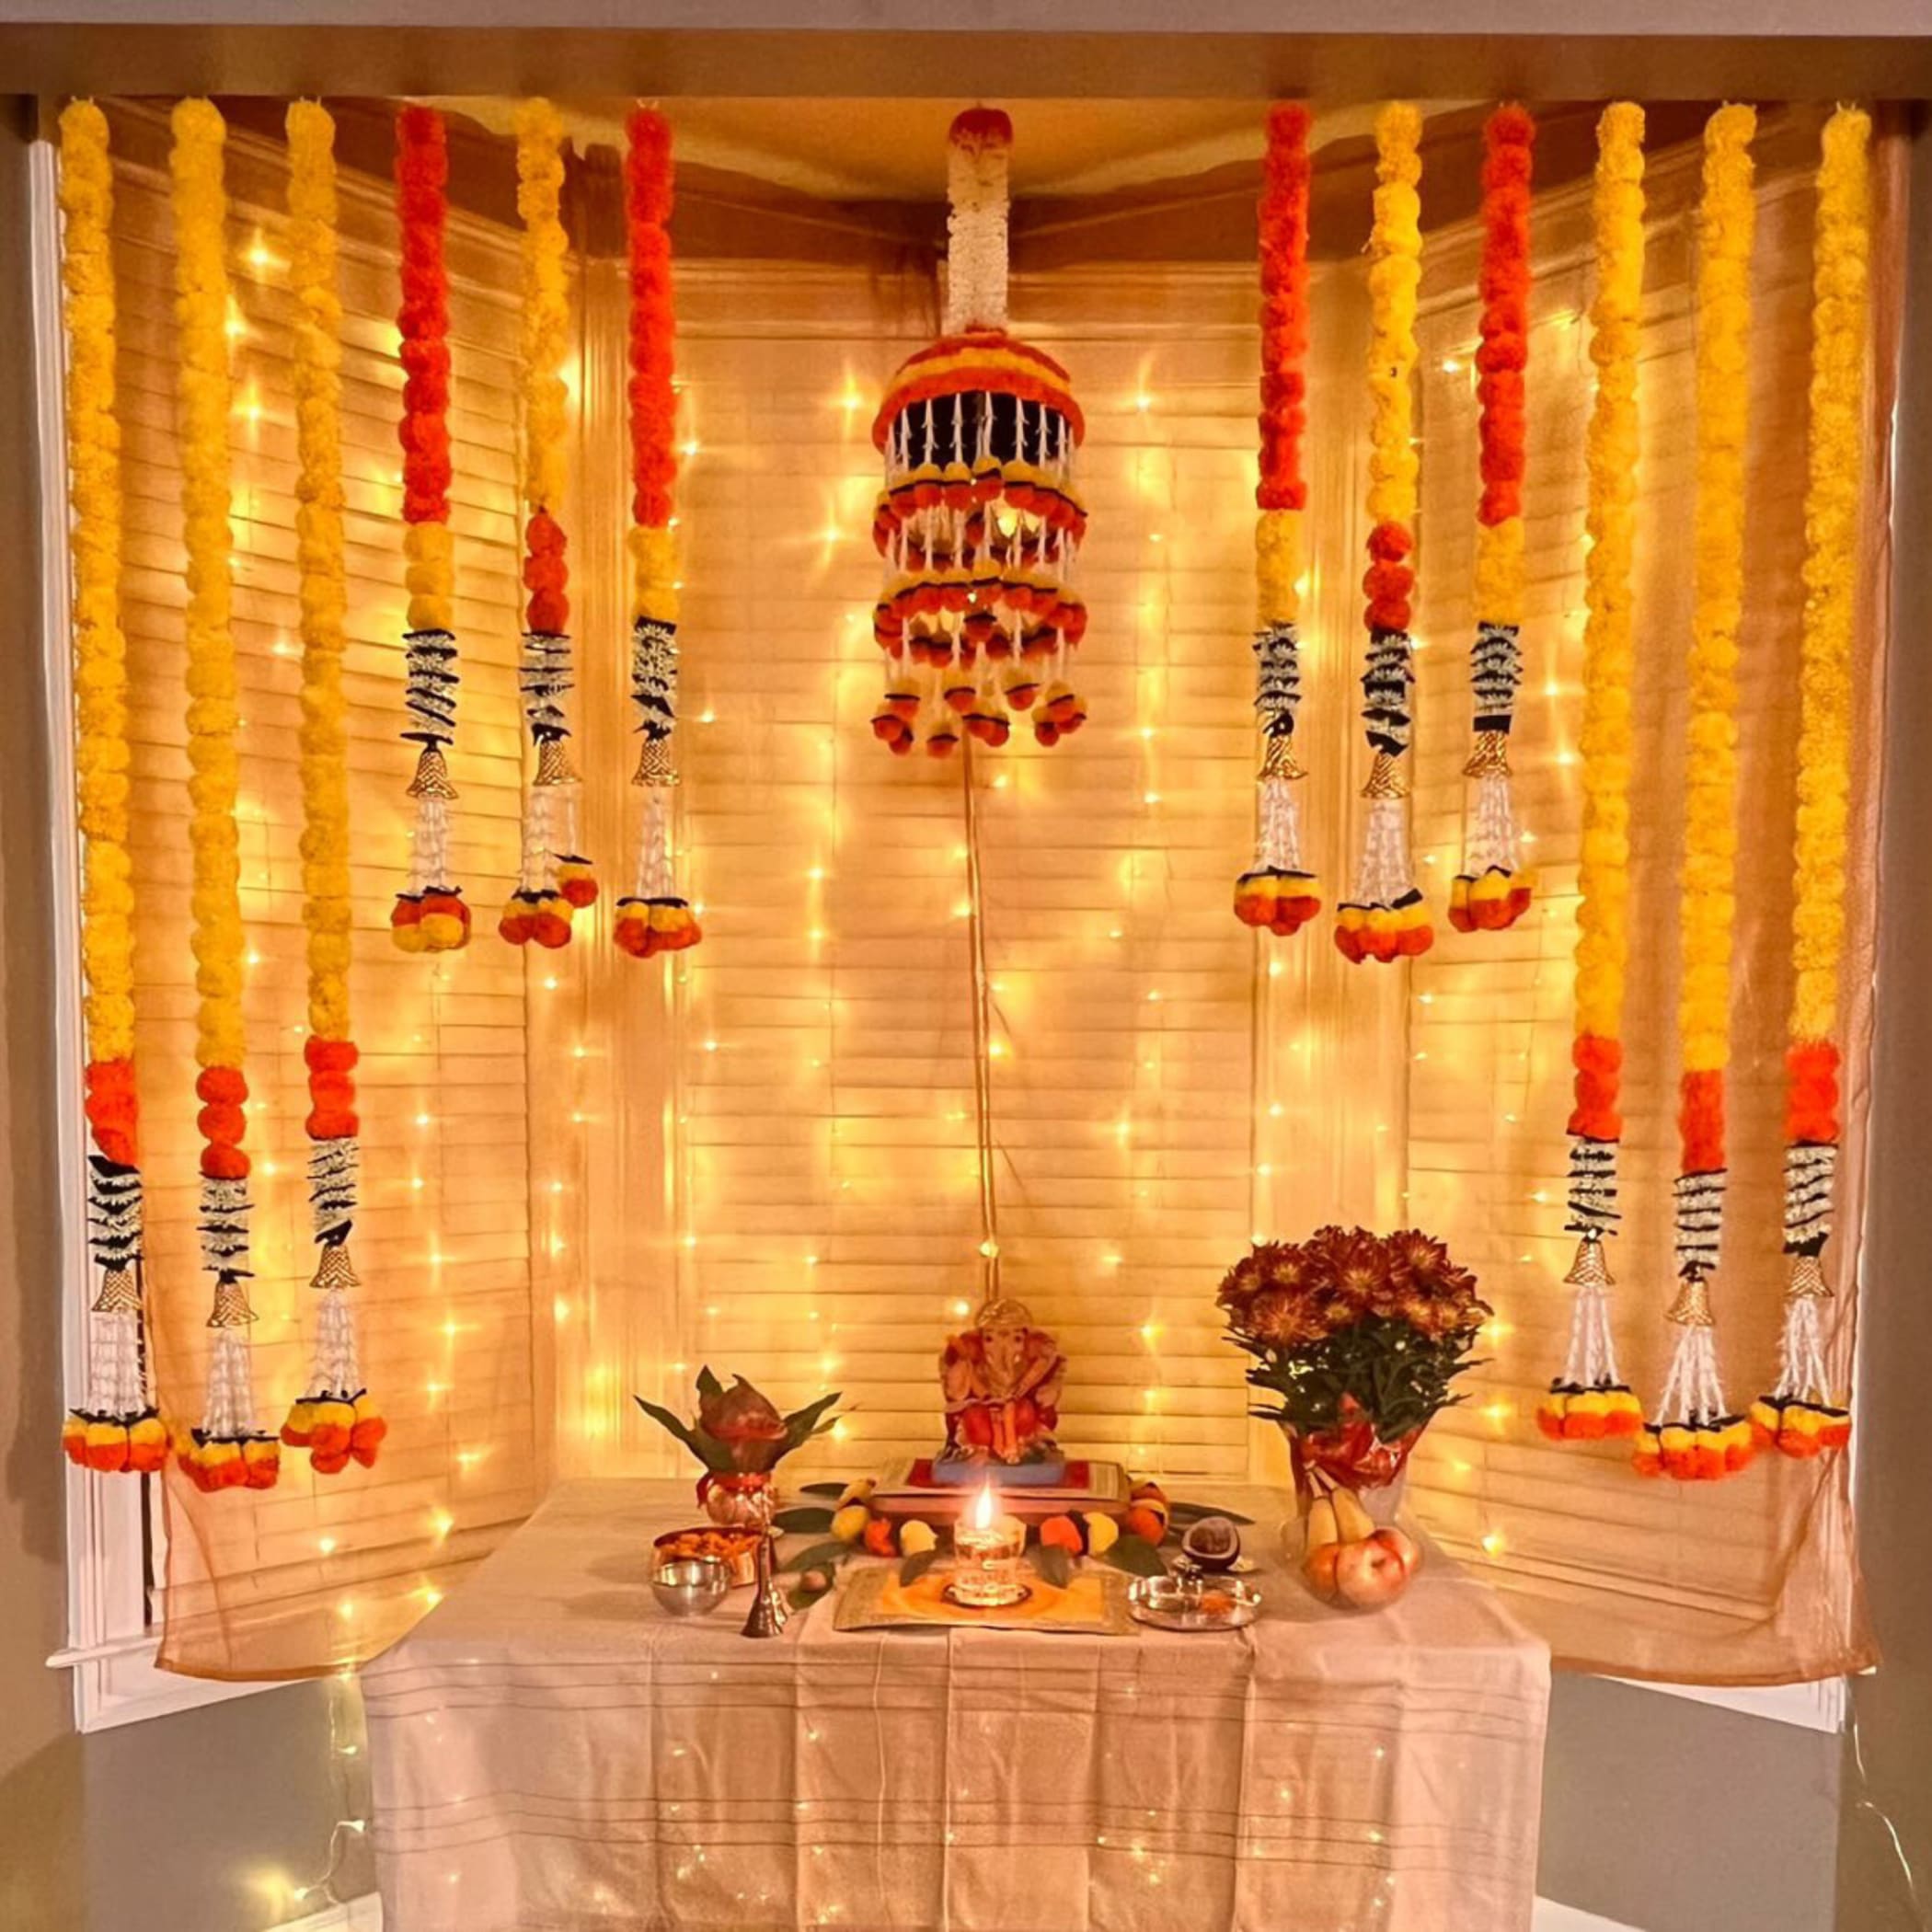 Marigold strings and jhoomar decor with mehndi decoration